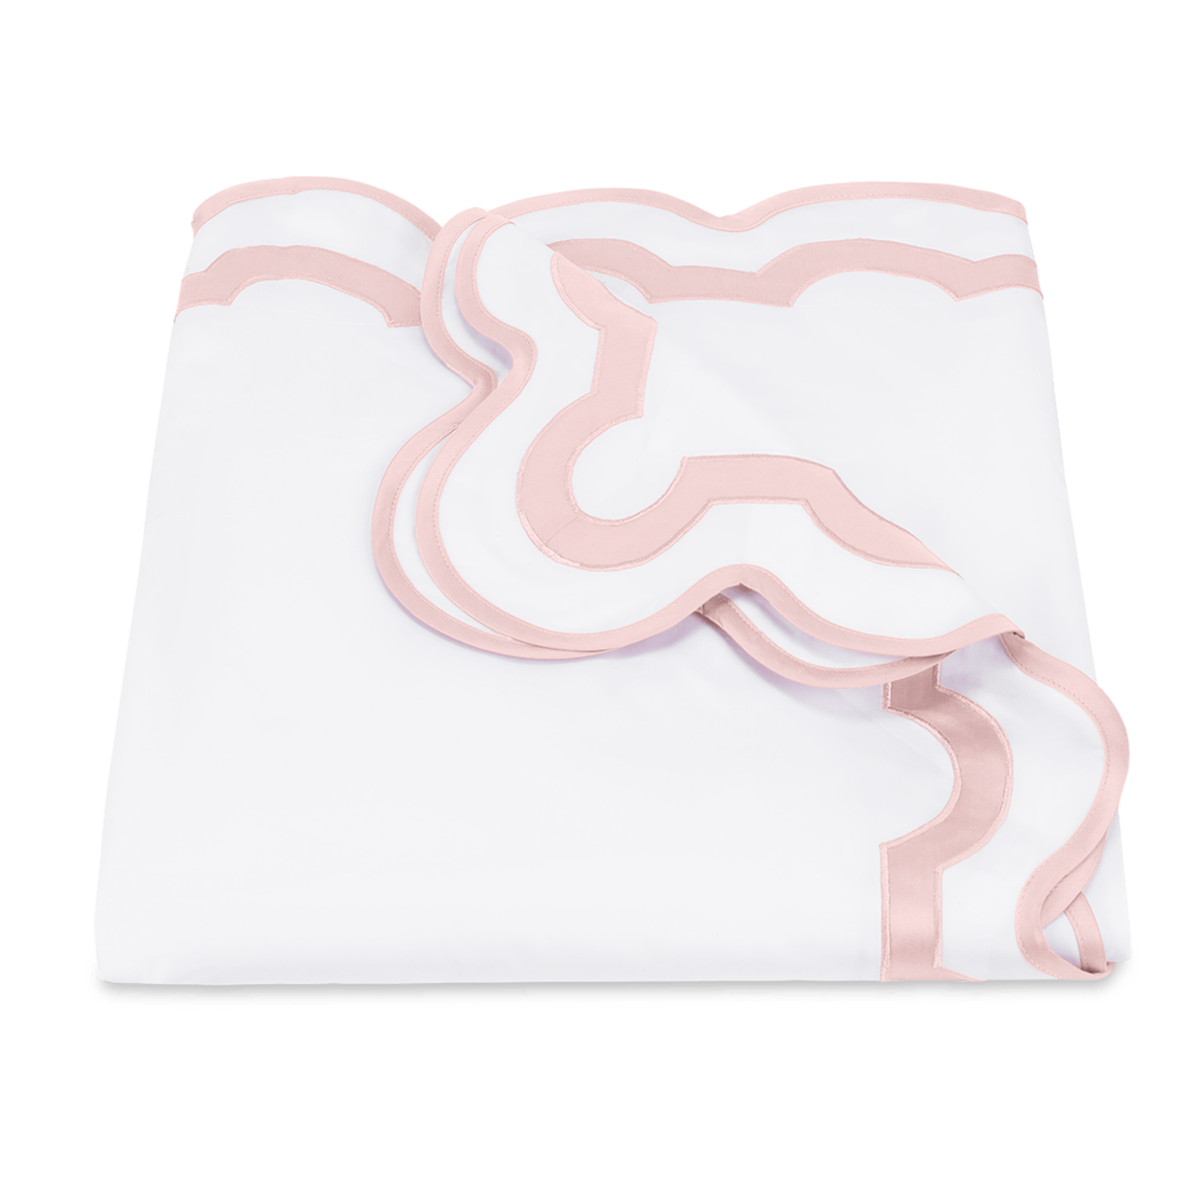 Folded Duvet Cover of Matouk Mirasol Collection in Pink Color